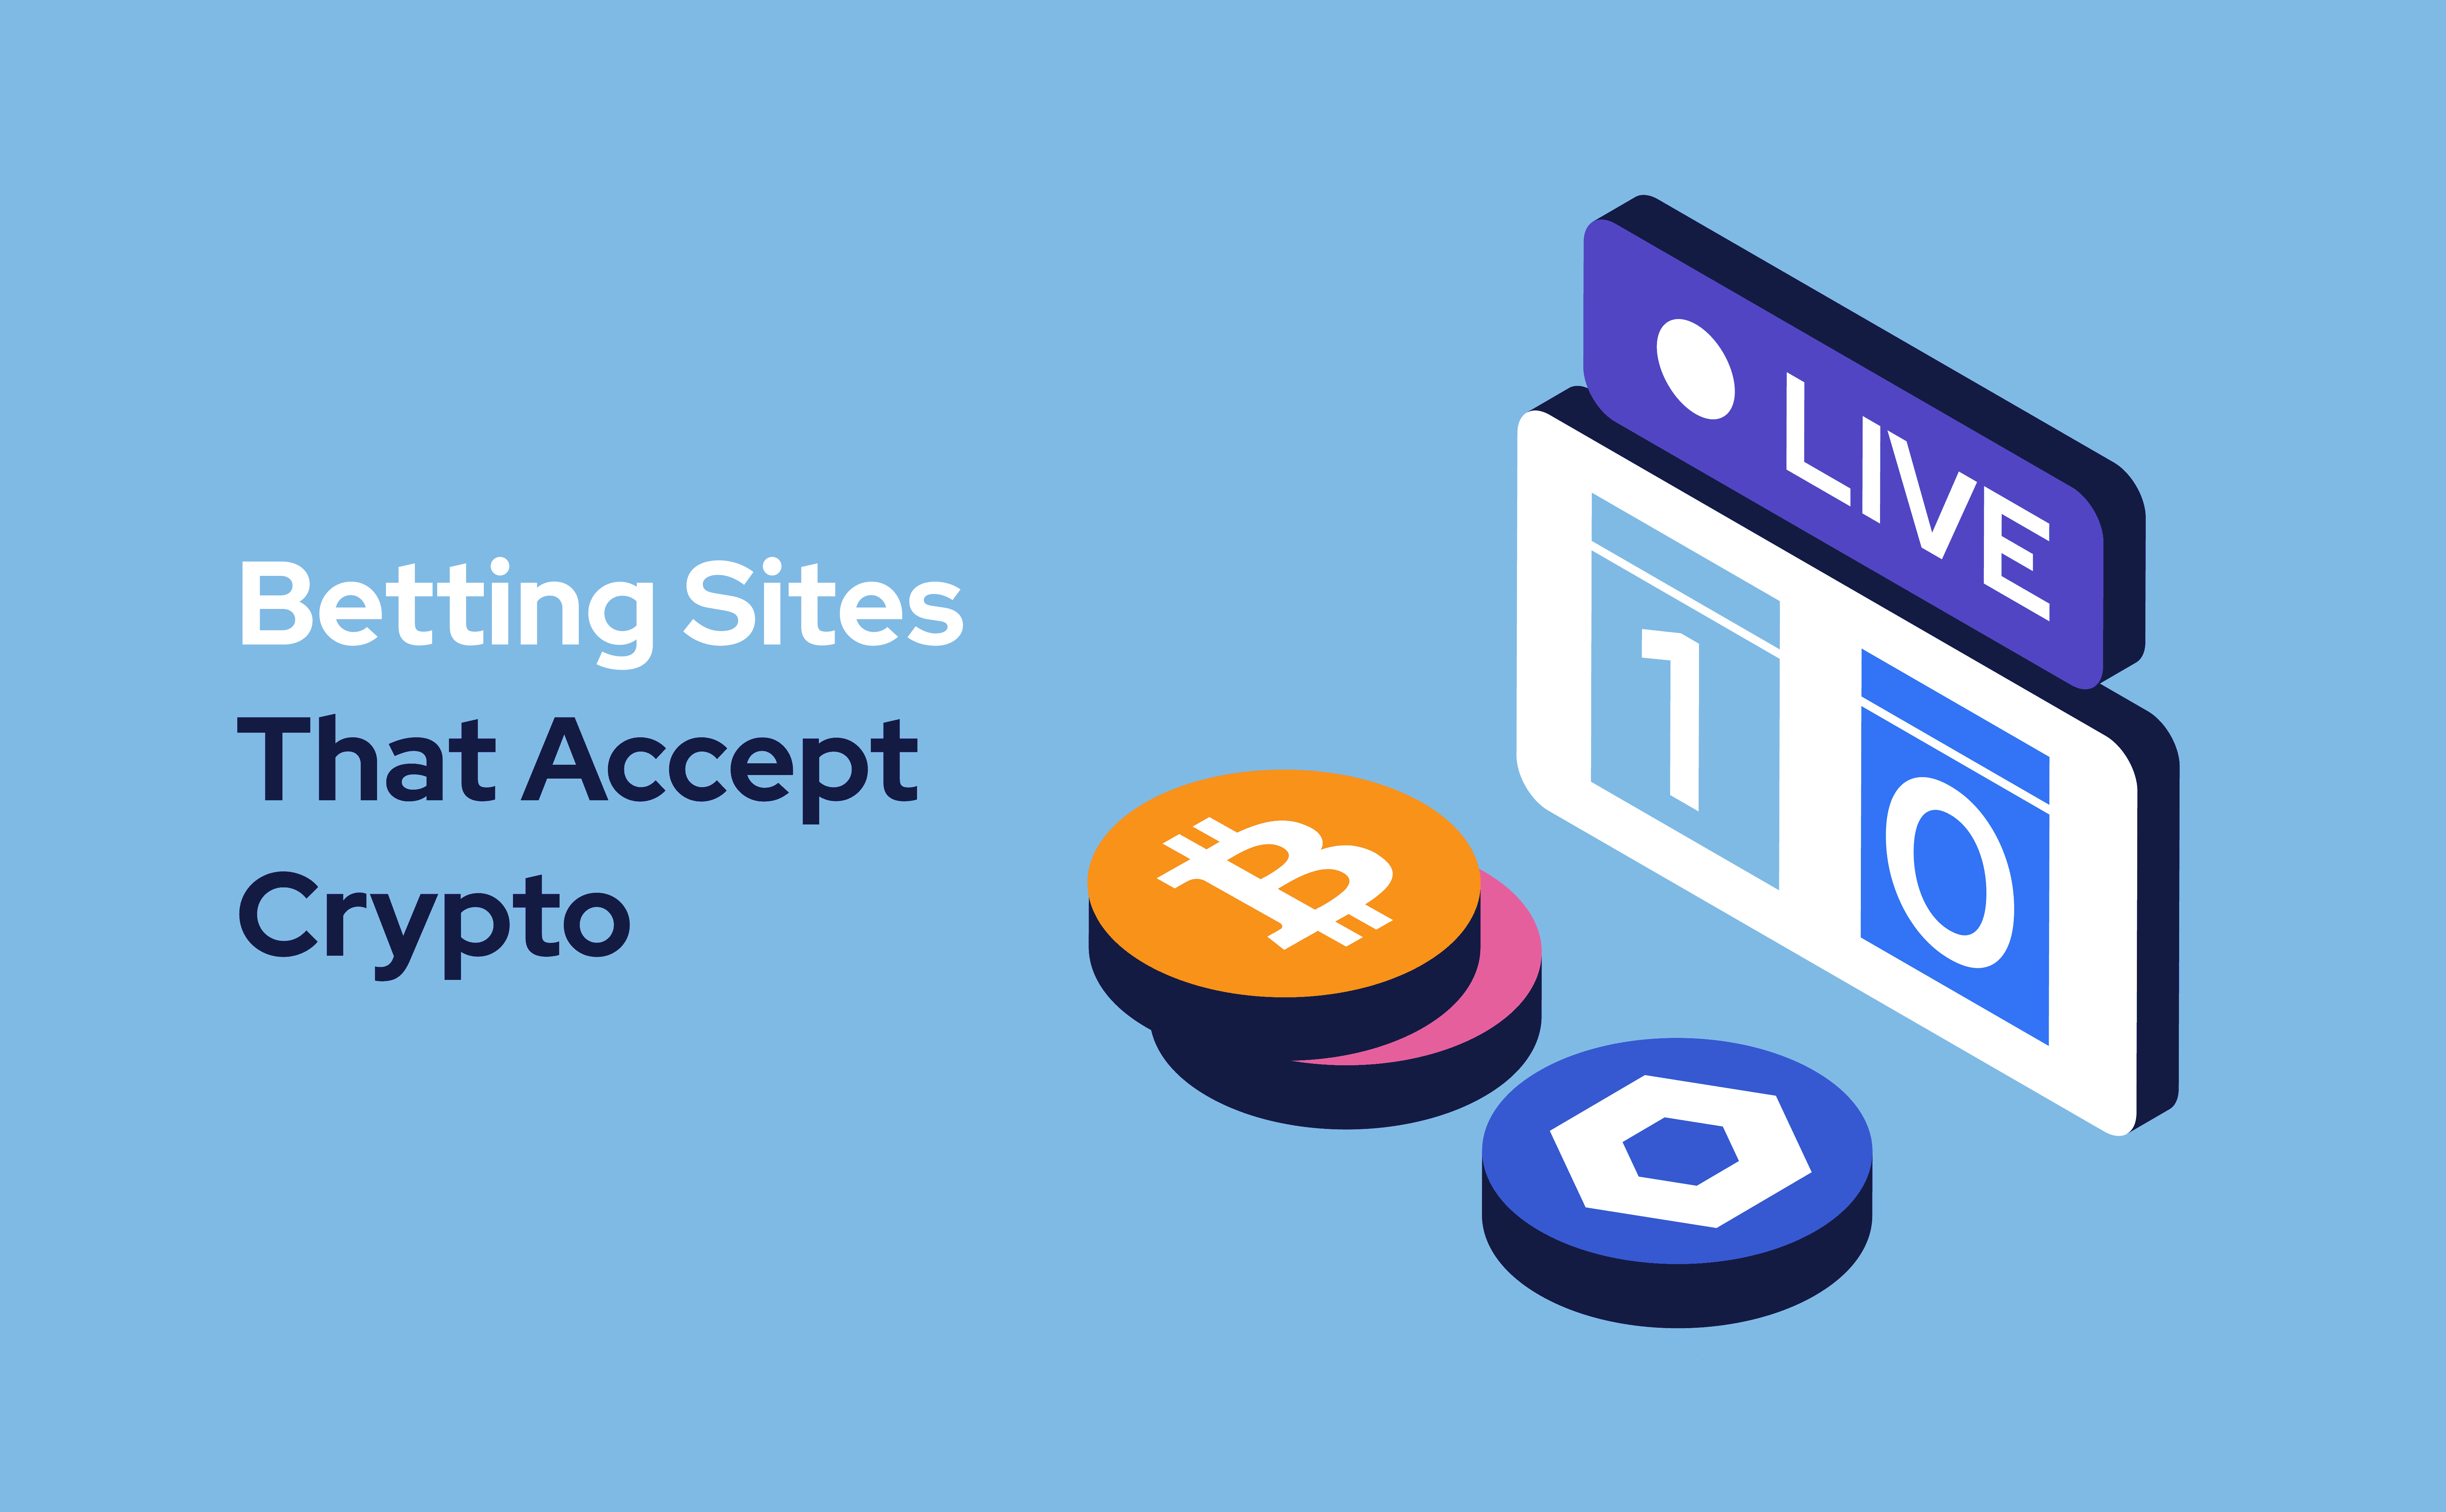 Betting Sites That Accept Bitcoin and cryptocurrencies